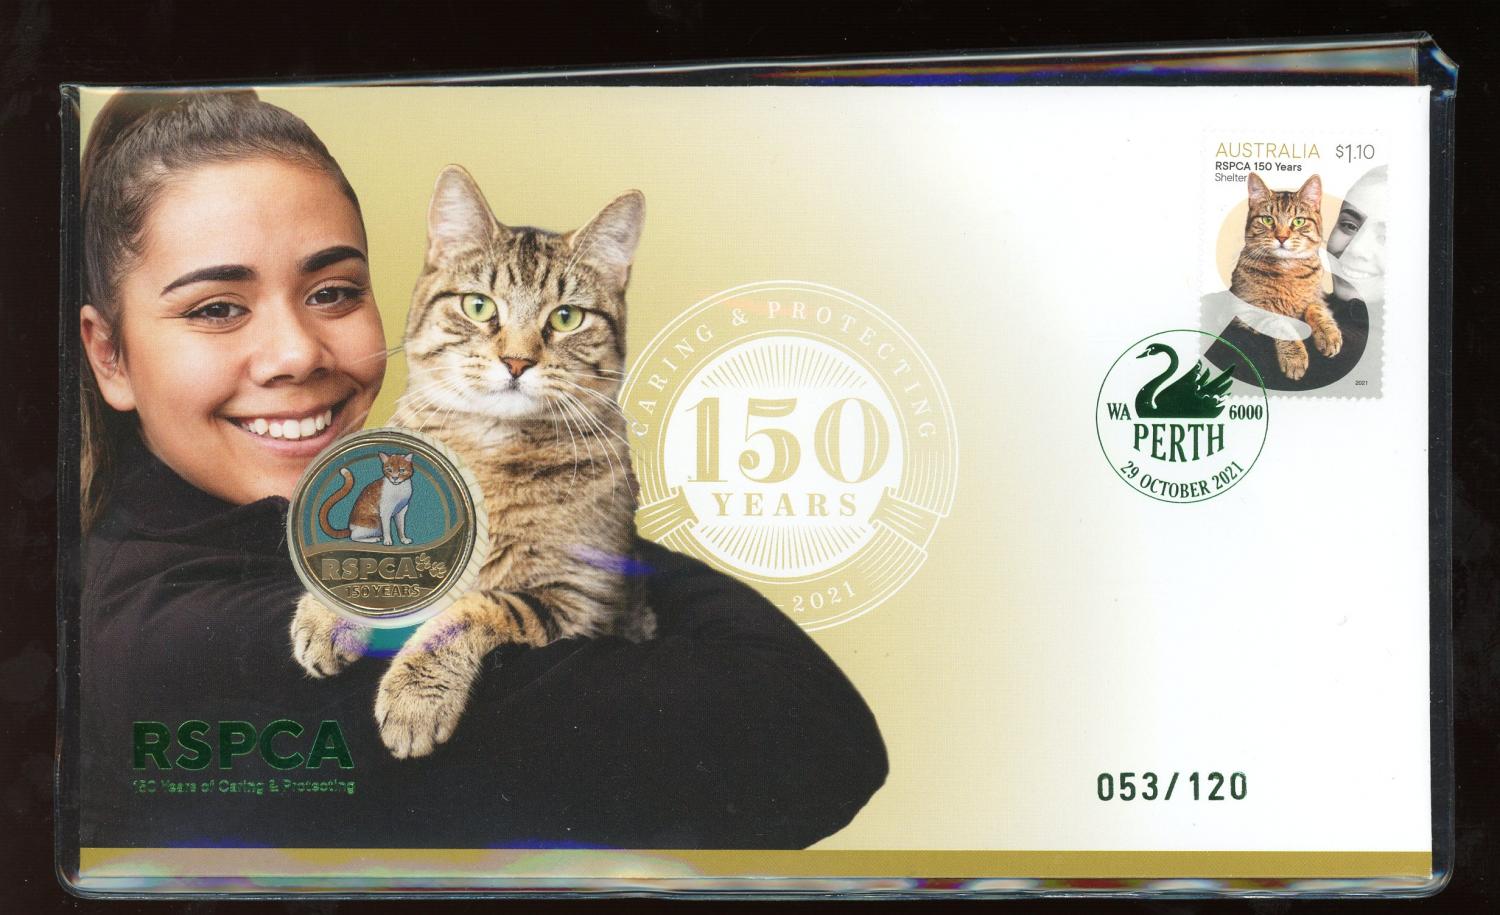 Thumbnail for 2021 Perth Coin and Stamp Show RSPCA Cat PNC 29th October